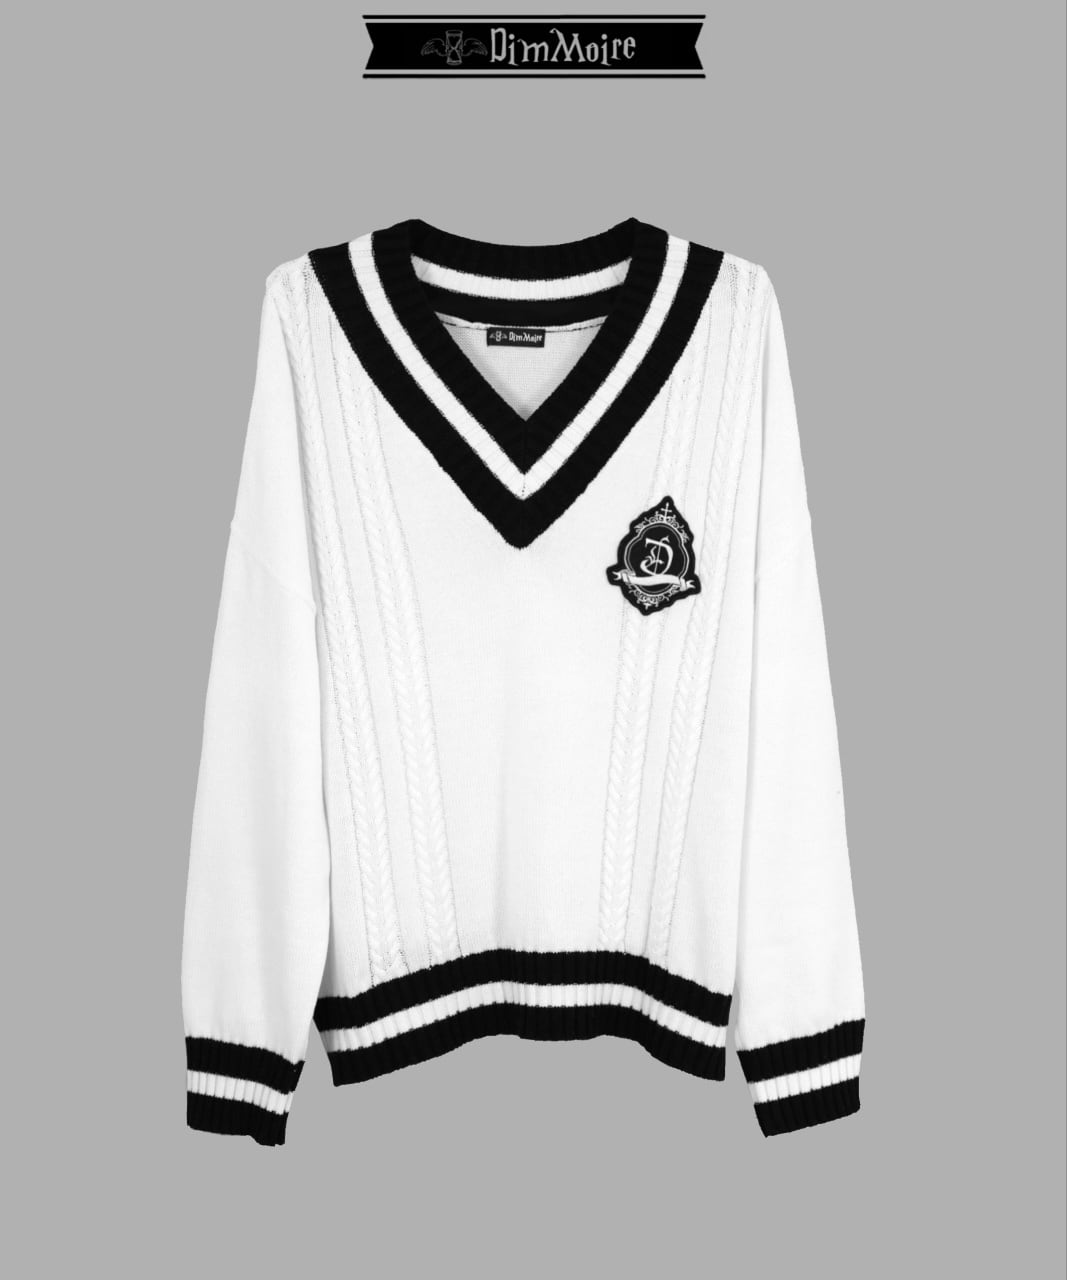 DimMoire Academy Sweater